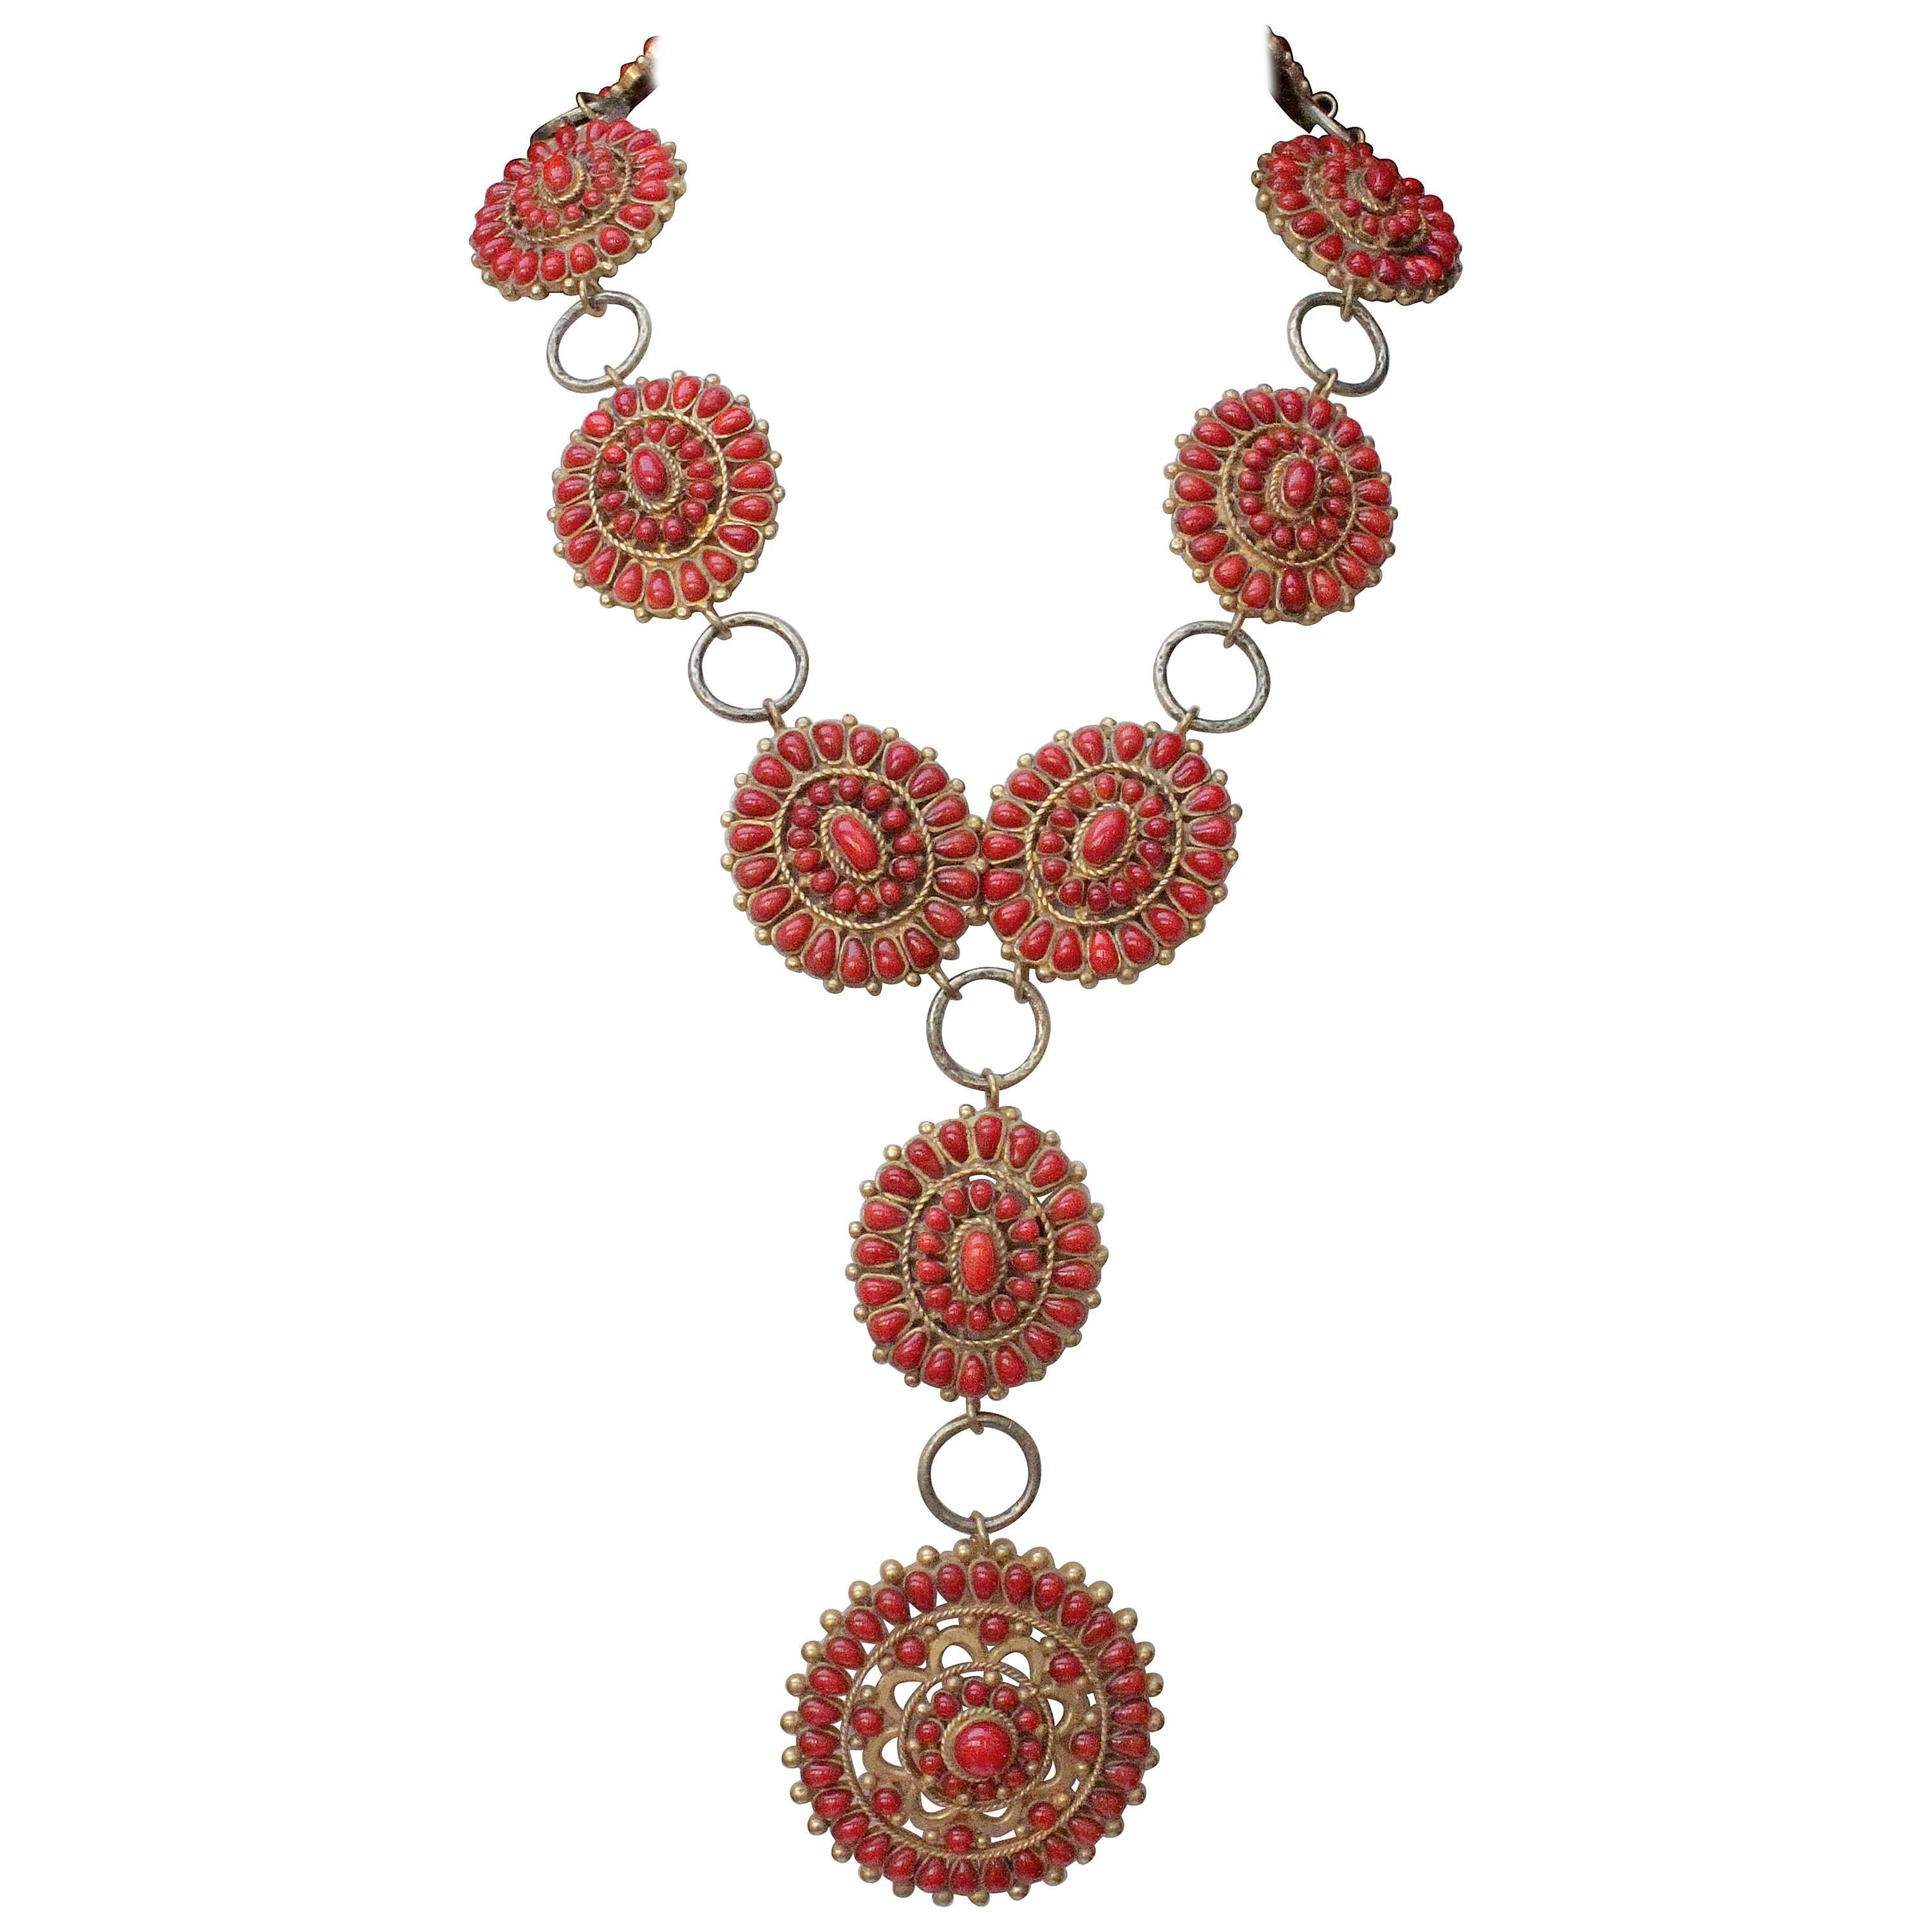 1993 Incredible Chanel Statement Necklace with Red Glass by Gripoix For Sale